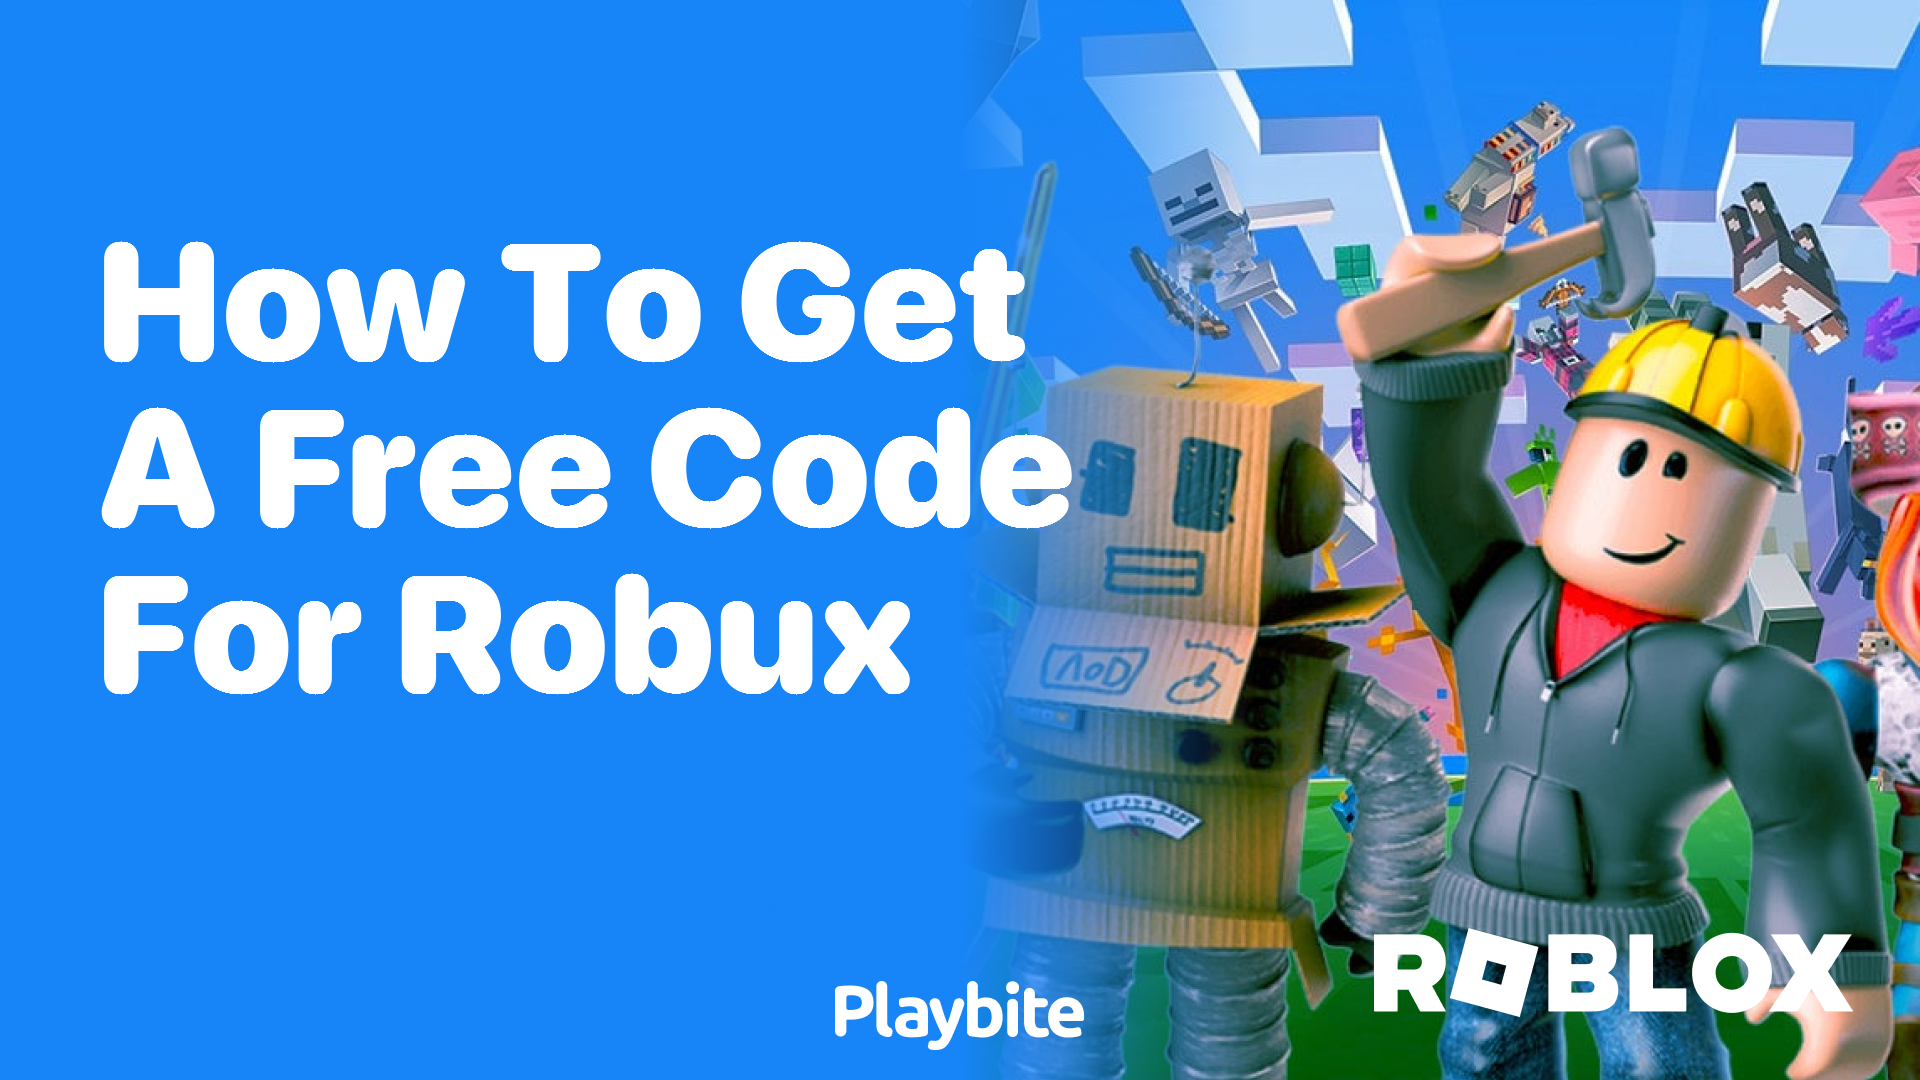 How to Get a Free Code for Robux